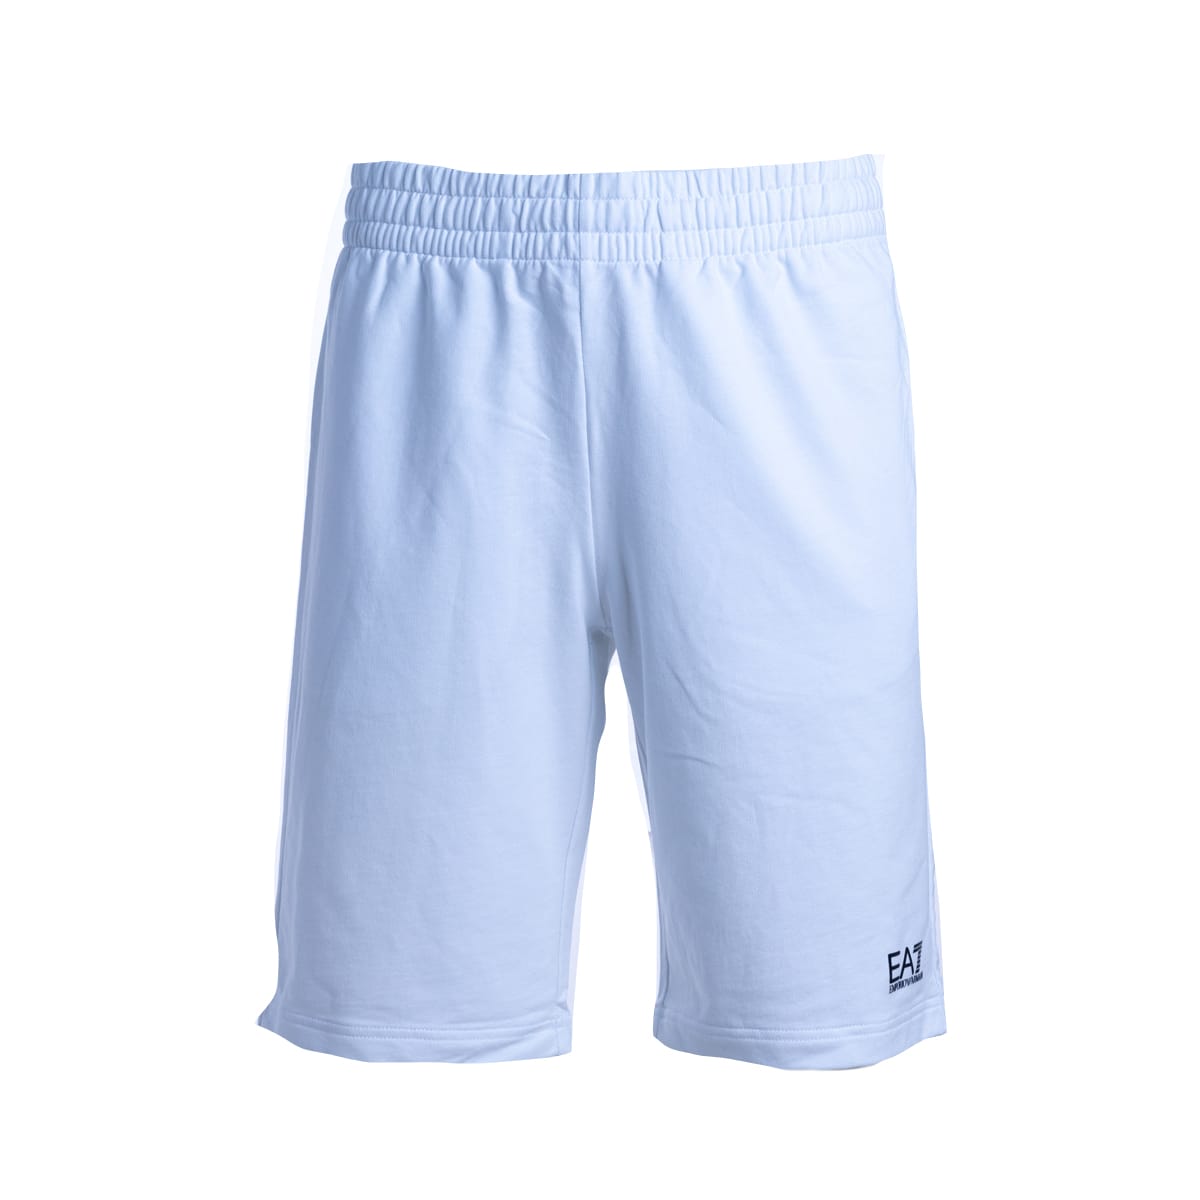 Ea7 Shorts In White